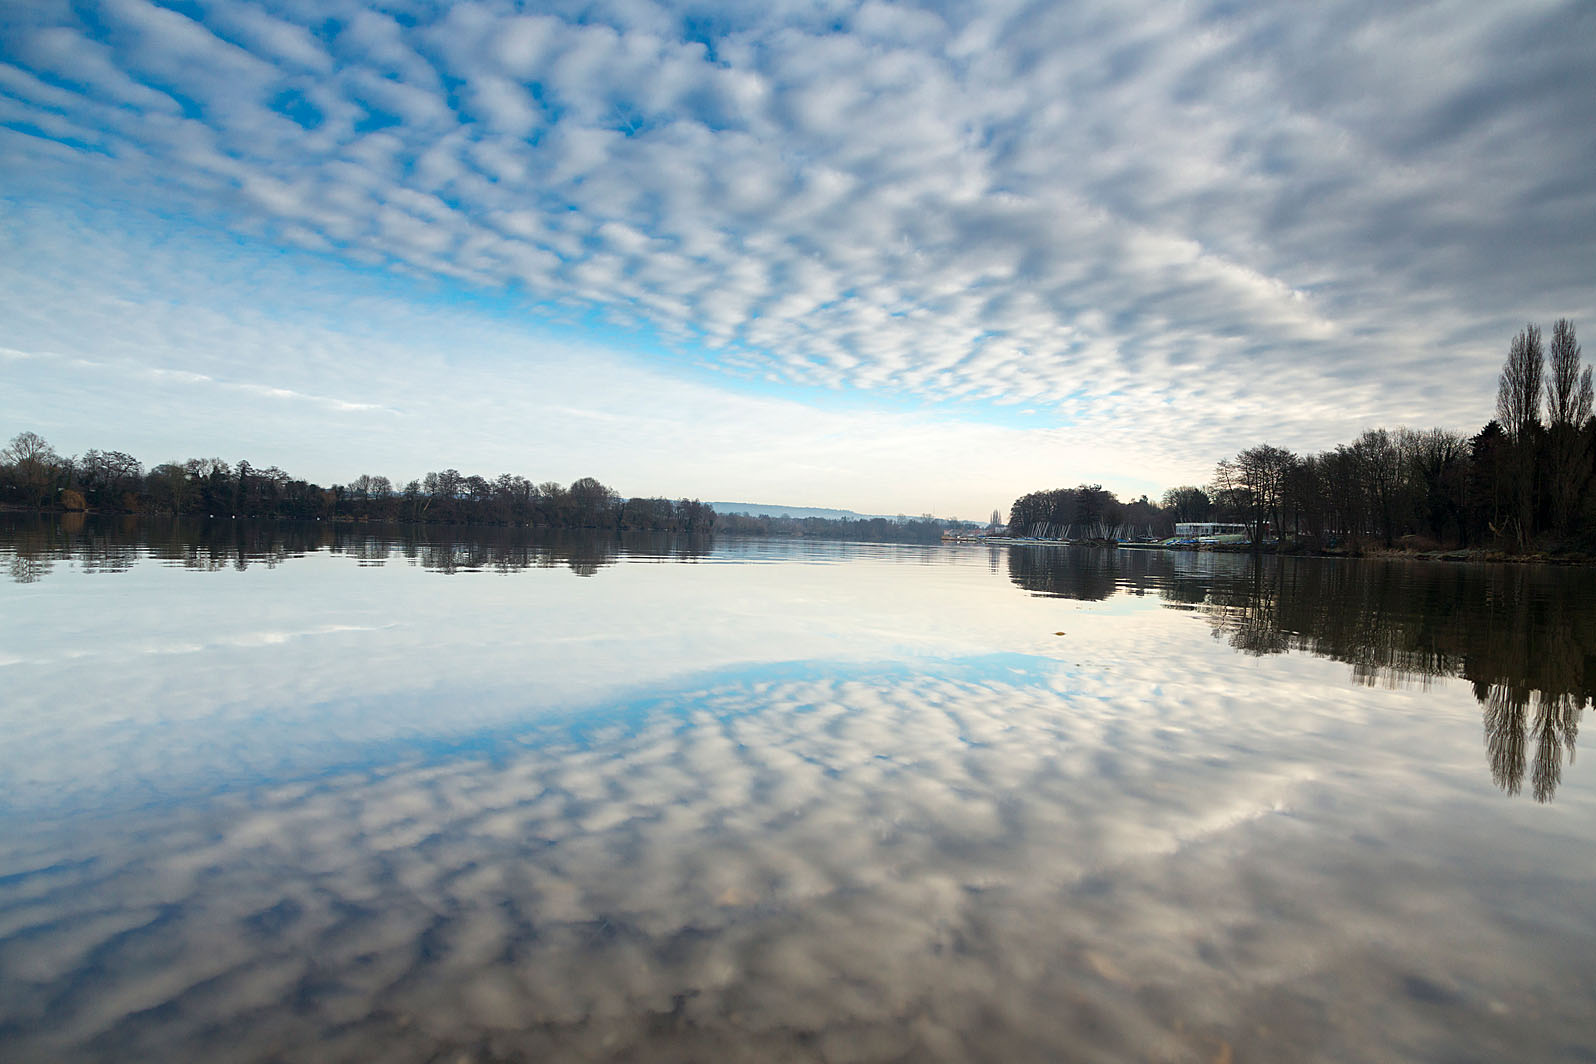 A lake takes up the lower half of the frame and reflects the other half of the image: the cloudy sky, and far away small forests.